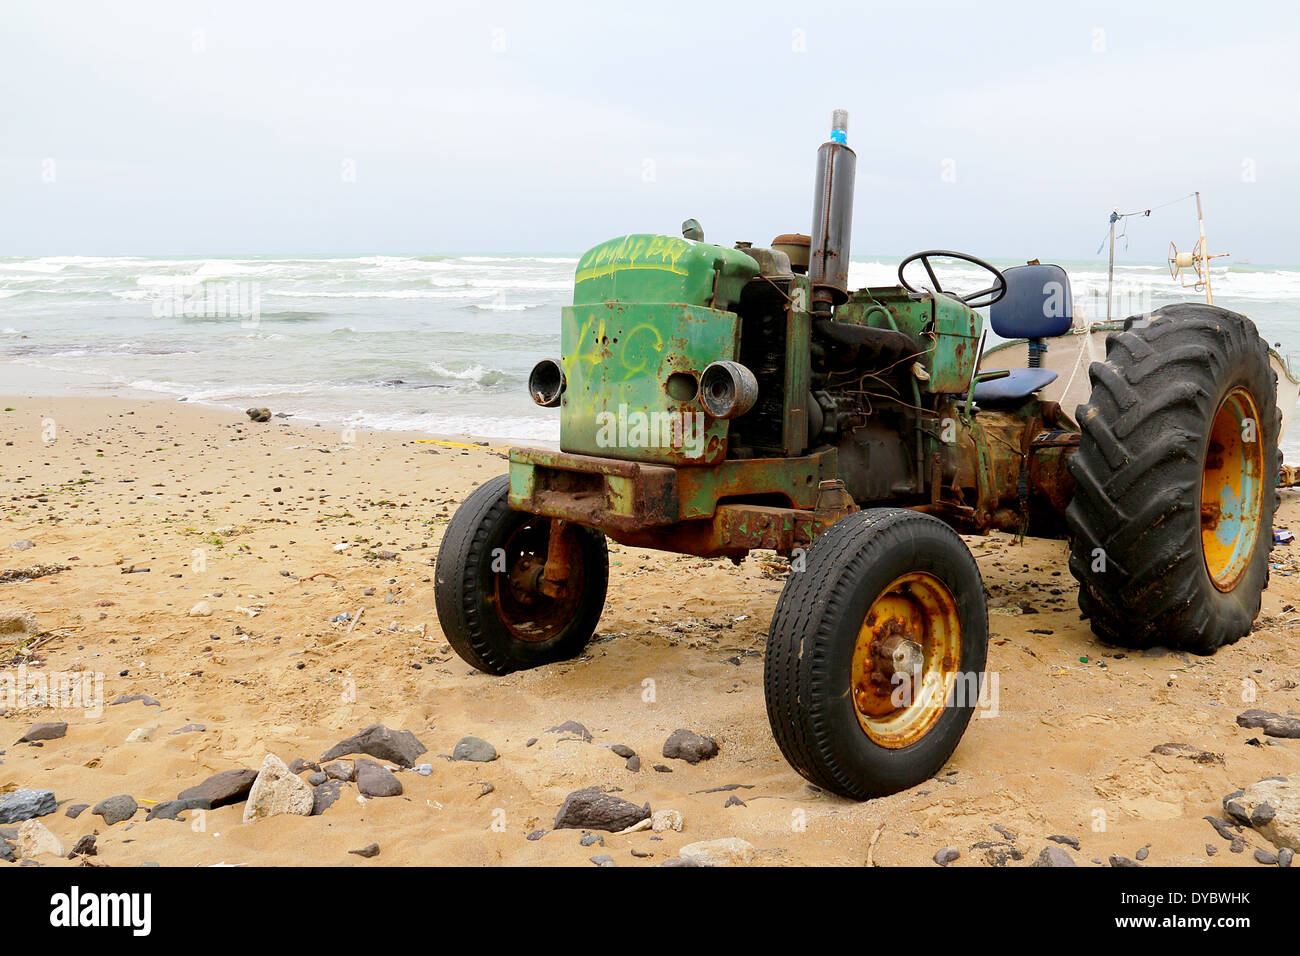 Image an Rusty Tractor on the Beach Stock Photo